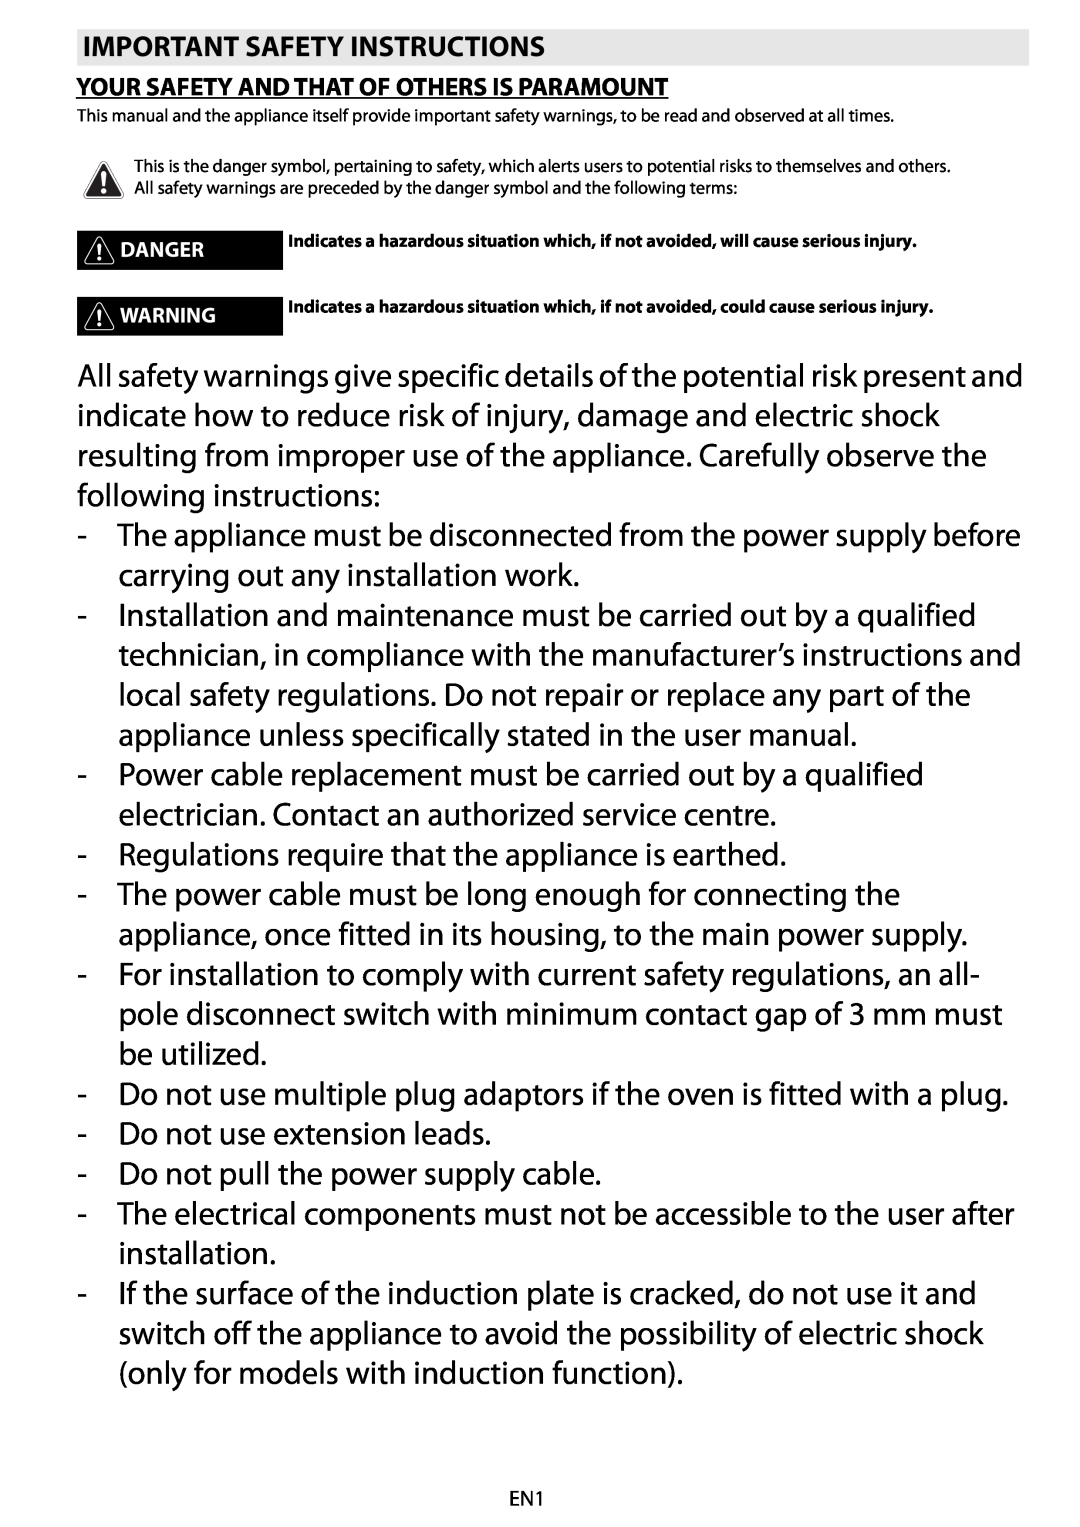 Whirlpool 663 manual do utilizador Regulations require that the appliance is earthed 